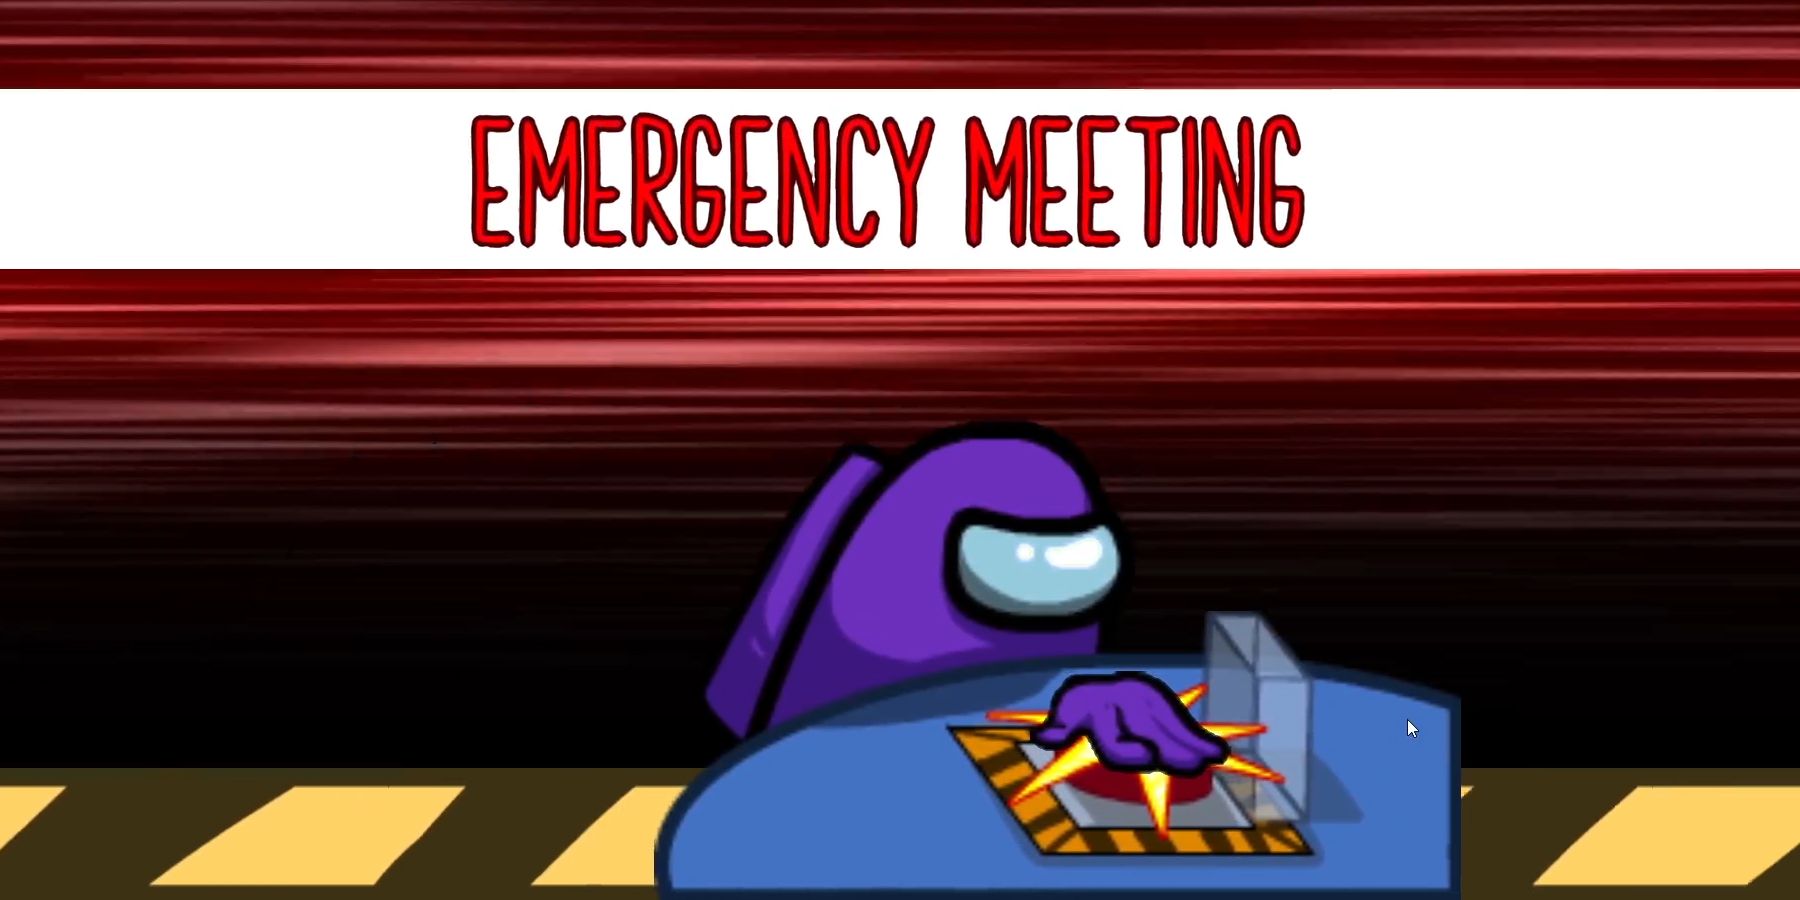 An Emergency Meeting is called by a player in Among Us.